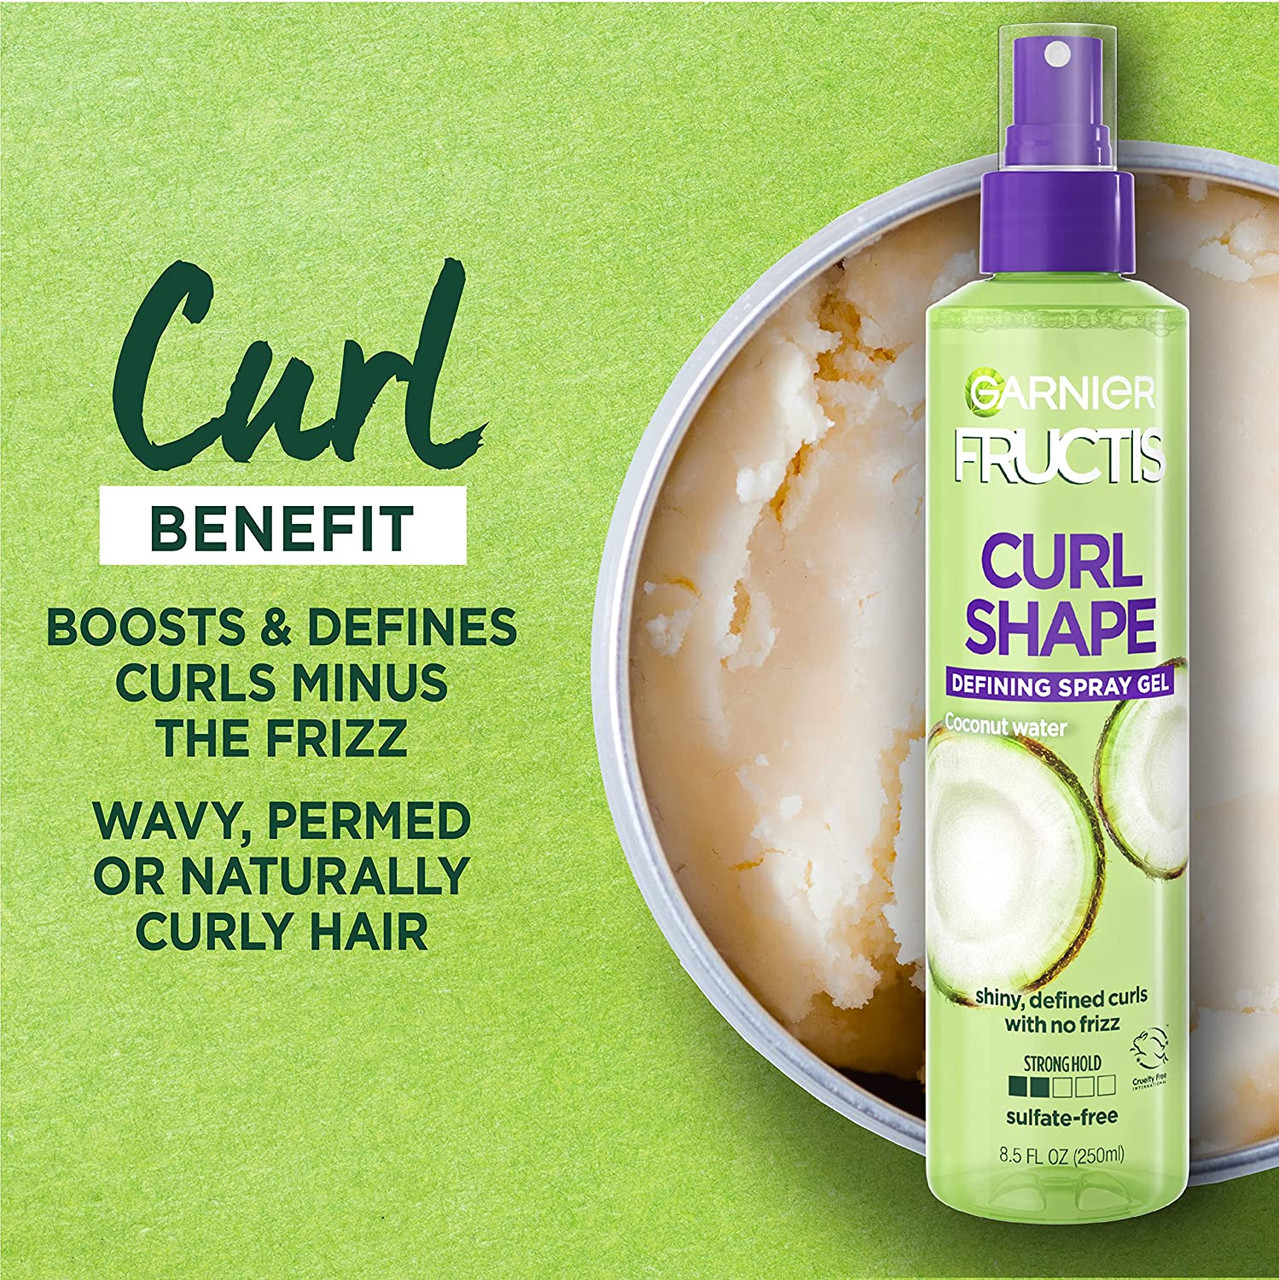 Garnier Fructis Curl Shape Defining Spray Gel, Coconut Water, 8.5 oz -  Whole And Natural